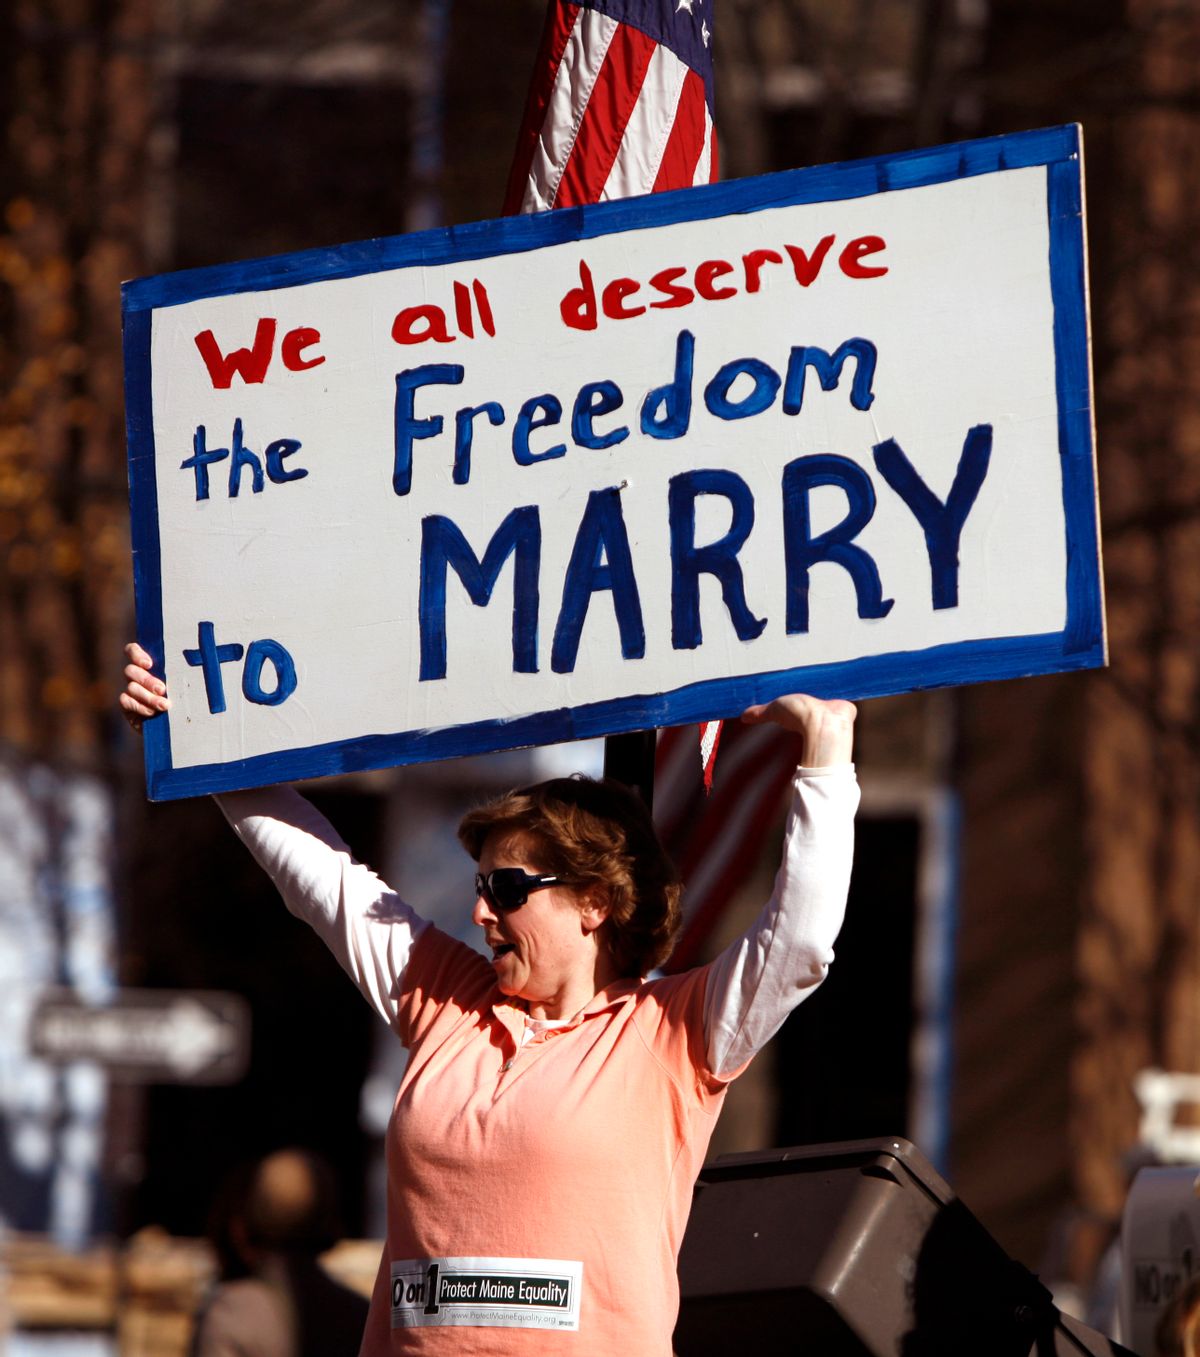 People participate in a pro gay marriage rally the day before election day in Portland, Maine, on Monday, Nov. 2, 2009.  Gay marriage legislation  was approved by  Maine's  Legislature earlier in the year however Maine voters go to the polls on Tuesday and  have the opportunity to become the first in the nation to approve gay marriage or vote against it, which would overturn the earlier legislation.(AP Photo/Pat Wellenbach)   (Pat Wellenbach)